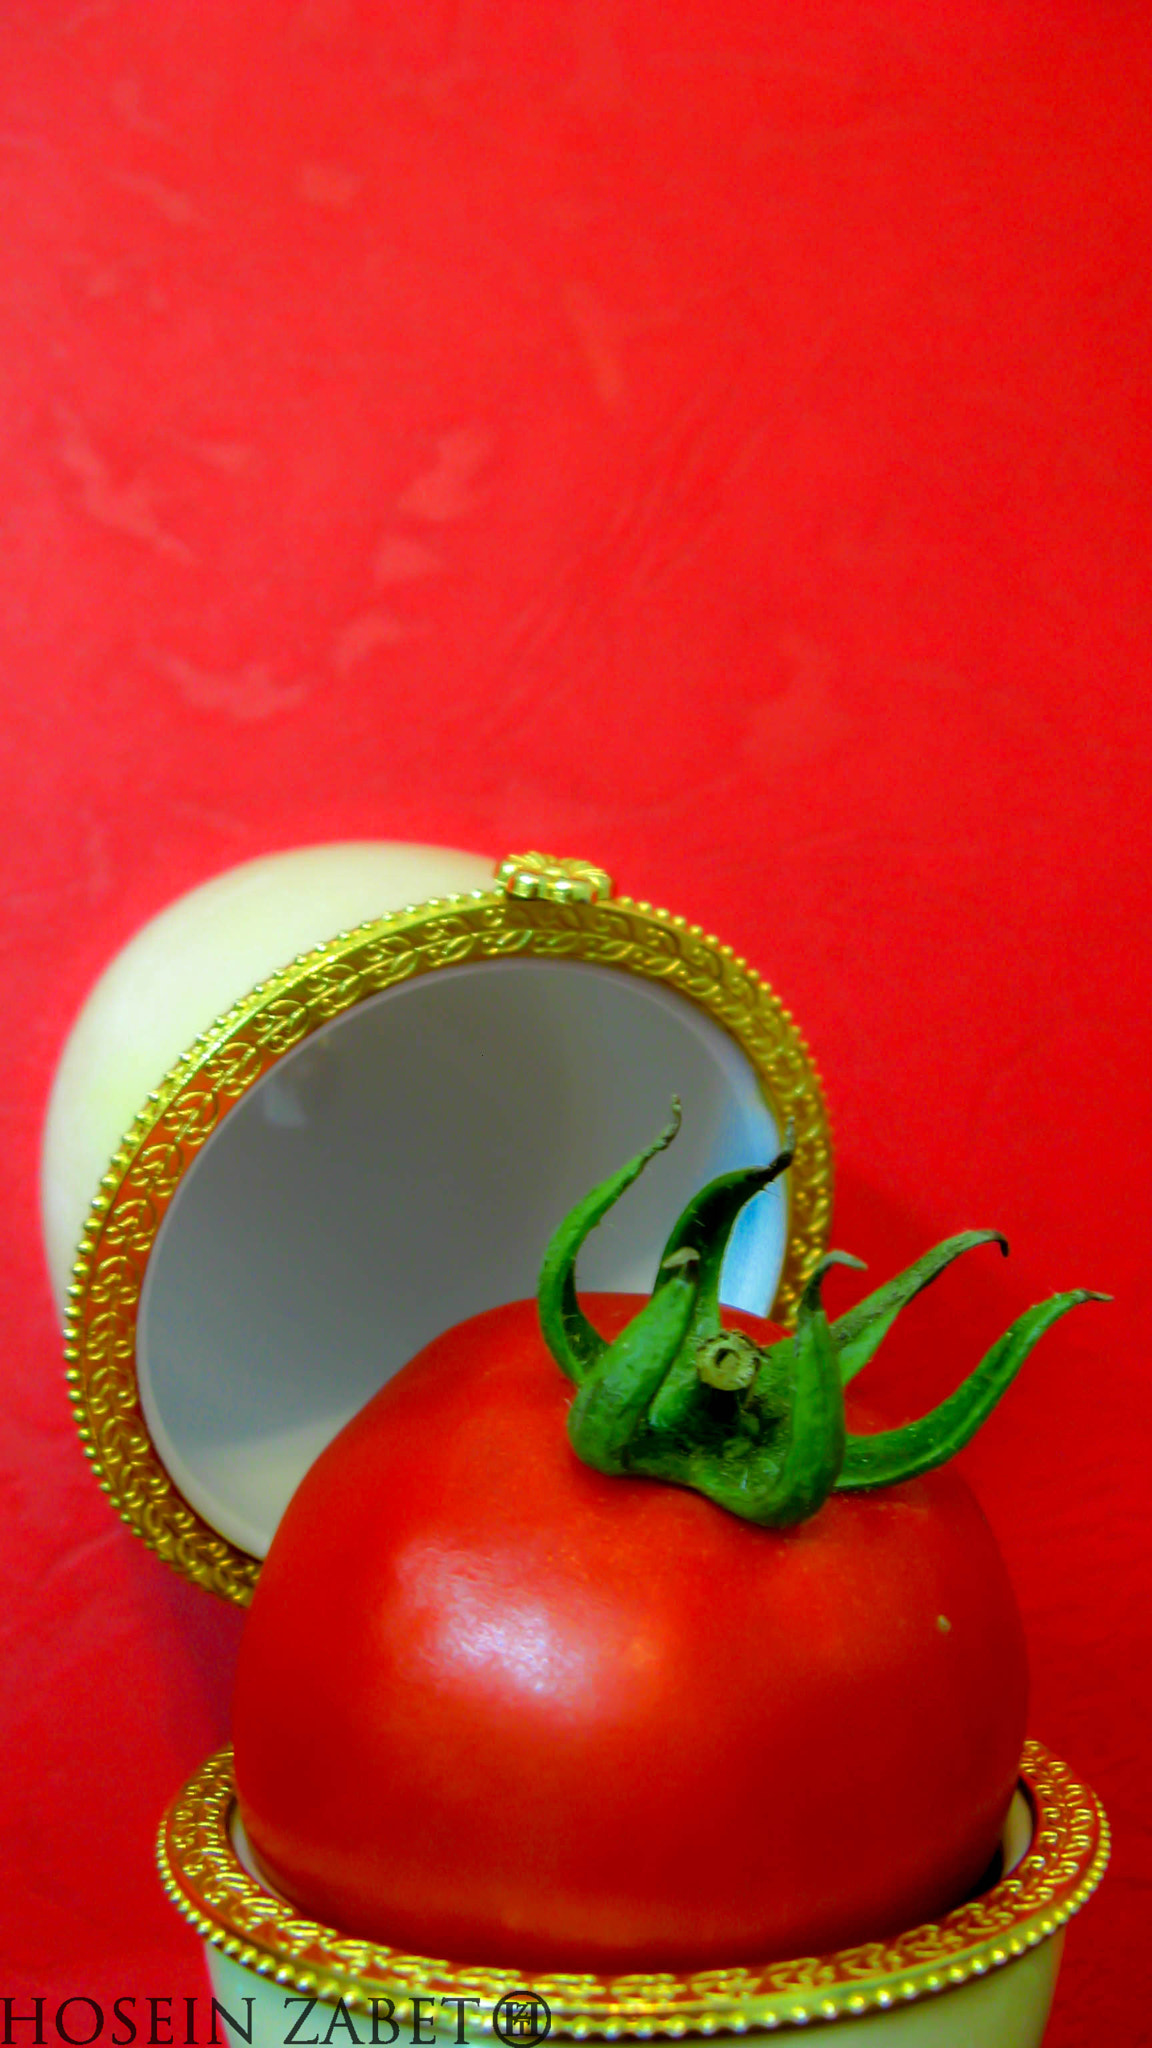 Canon POWERSHOT A710 IS sample photo. King of tomatoes :-) photography